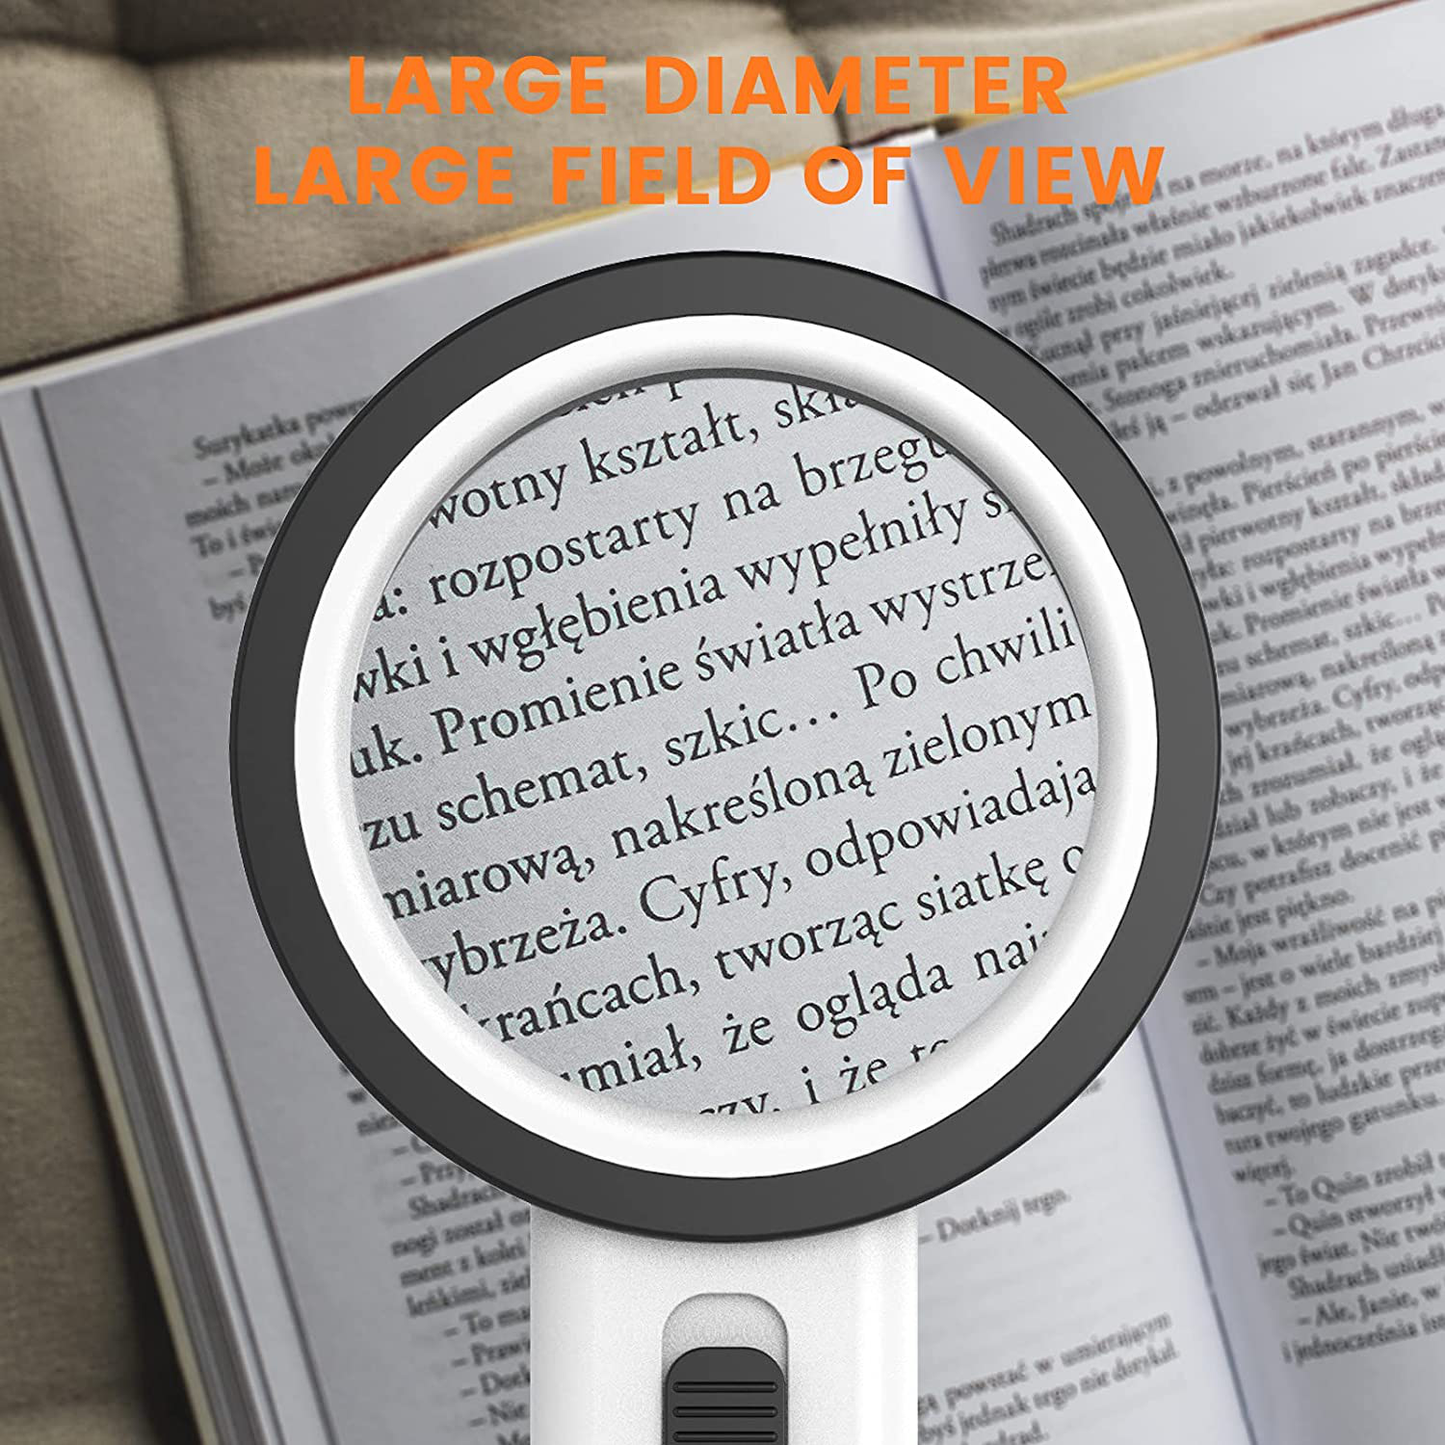 Magnifying Glass with Light, 30X Handheld Large Magnifying Glass 12 LED Illuminated Lighted Magnifier for Macular Degeneration, Seniors Reading, Soldering, Inspection, Coins, Jewelry, Exploring(White)